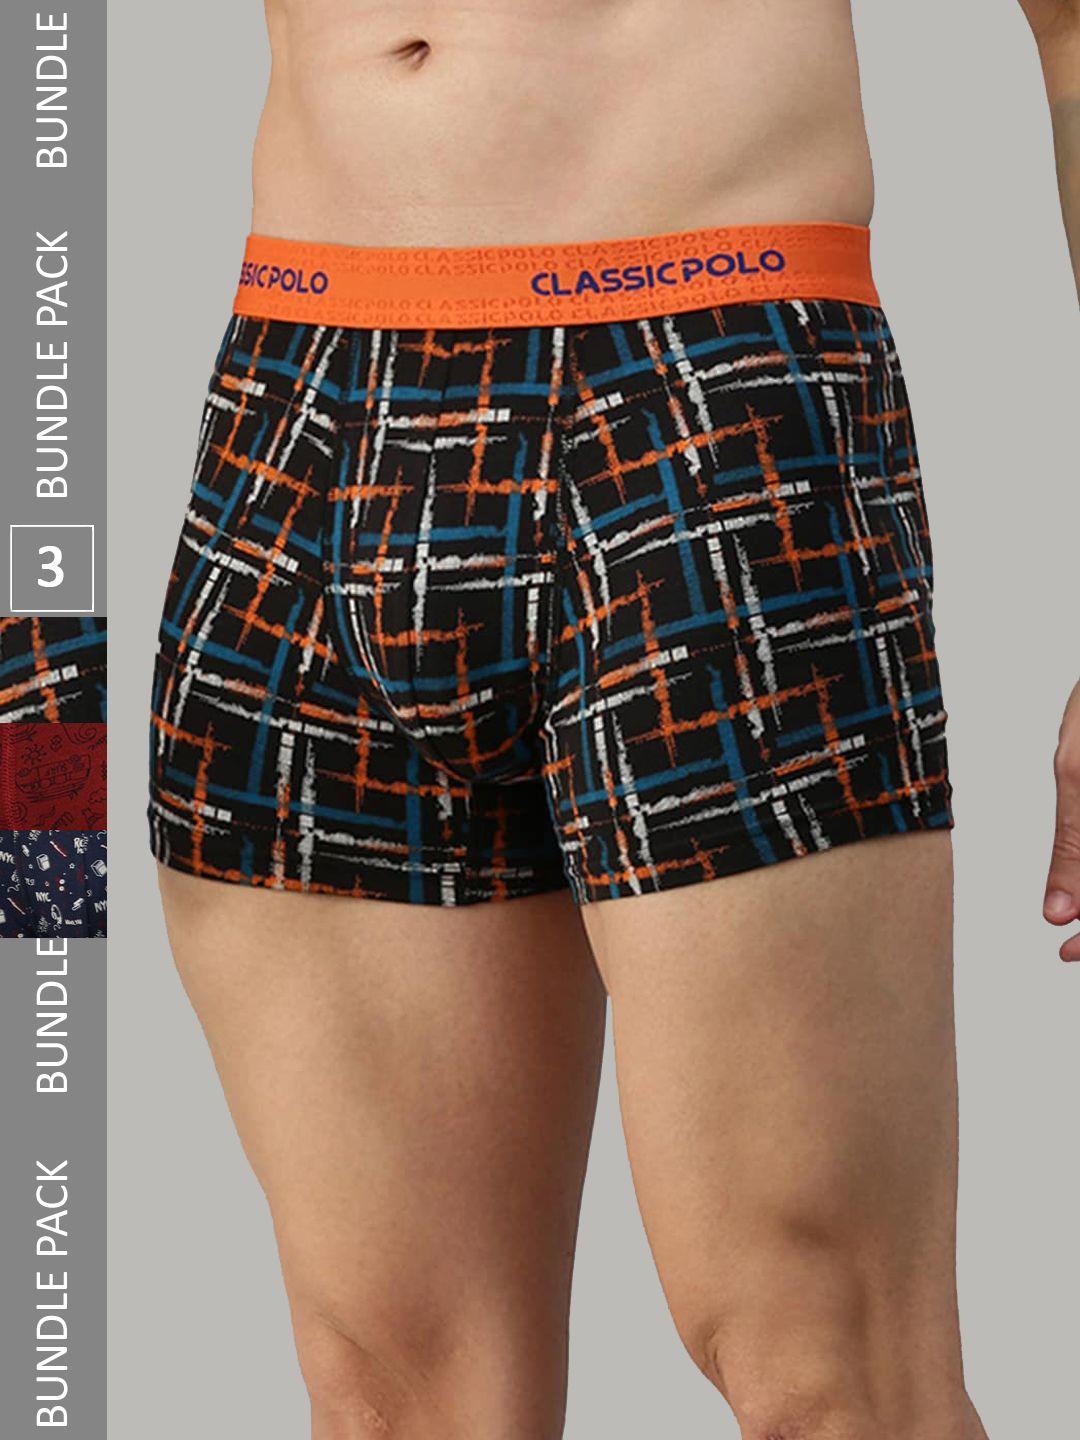 classic polo men pack of 3 printed slim-fit modal trunks